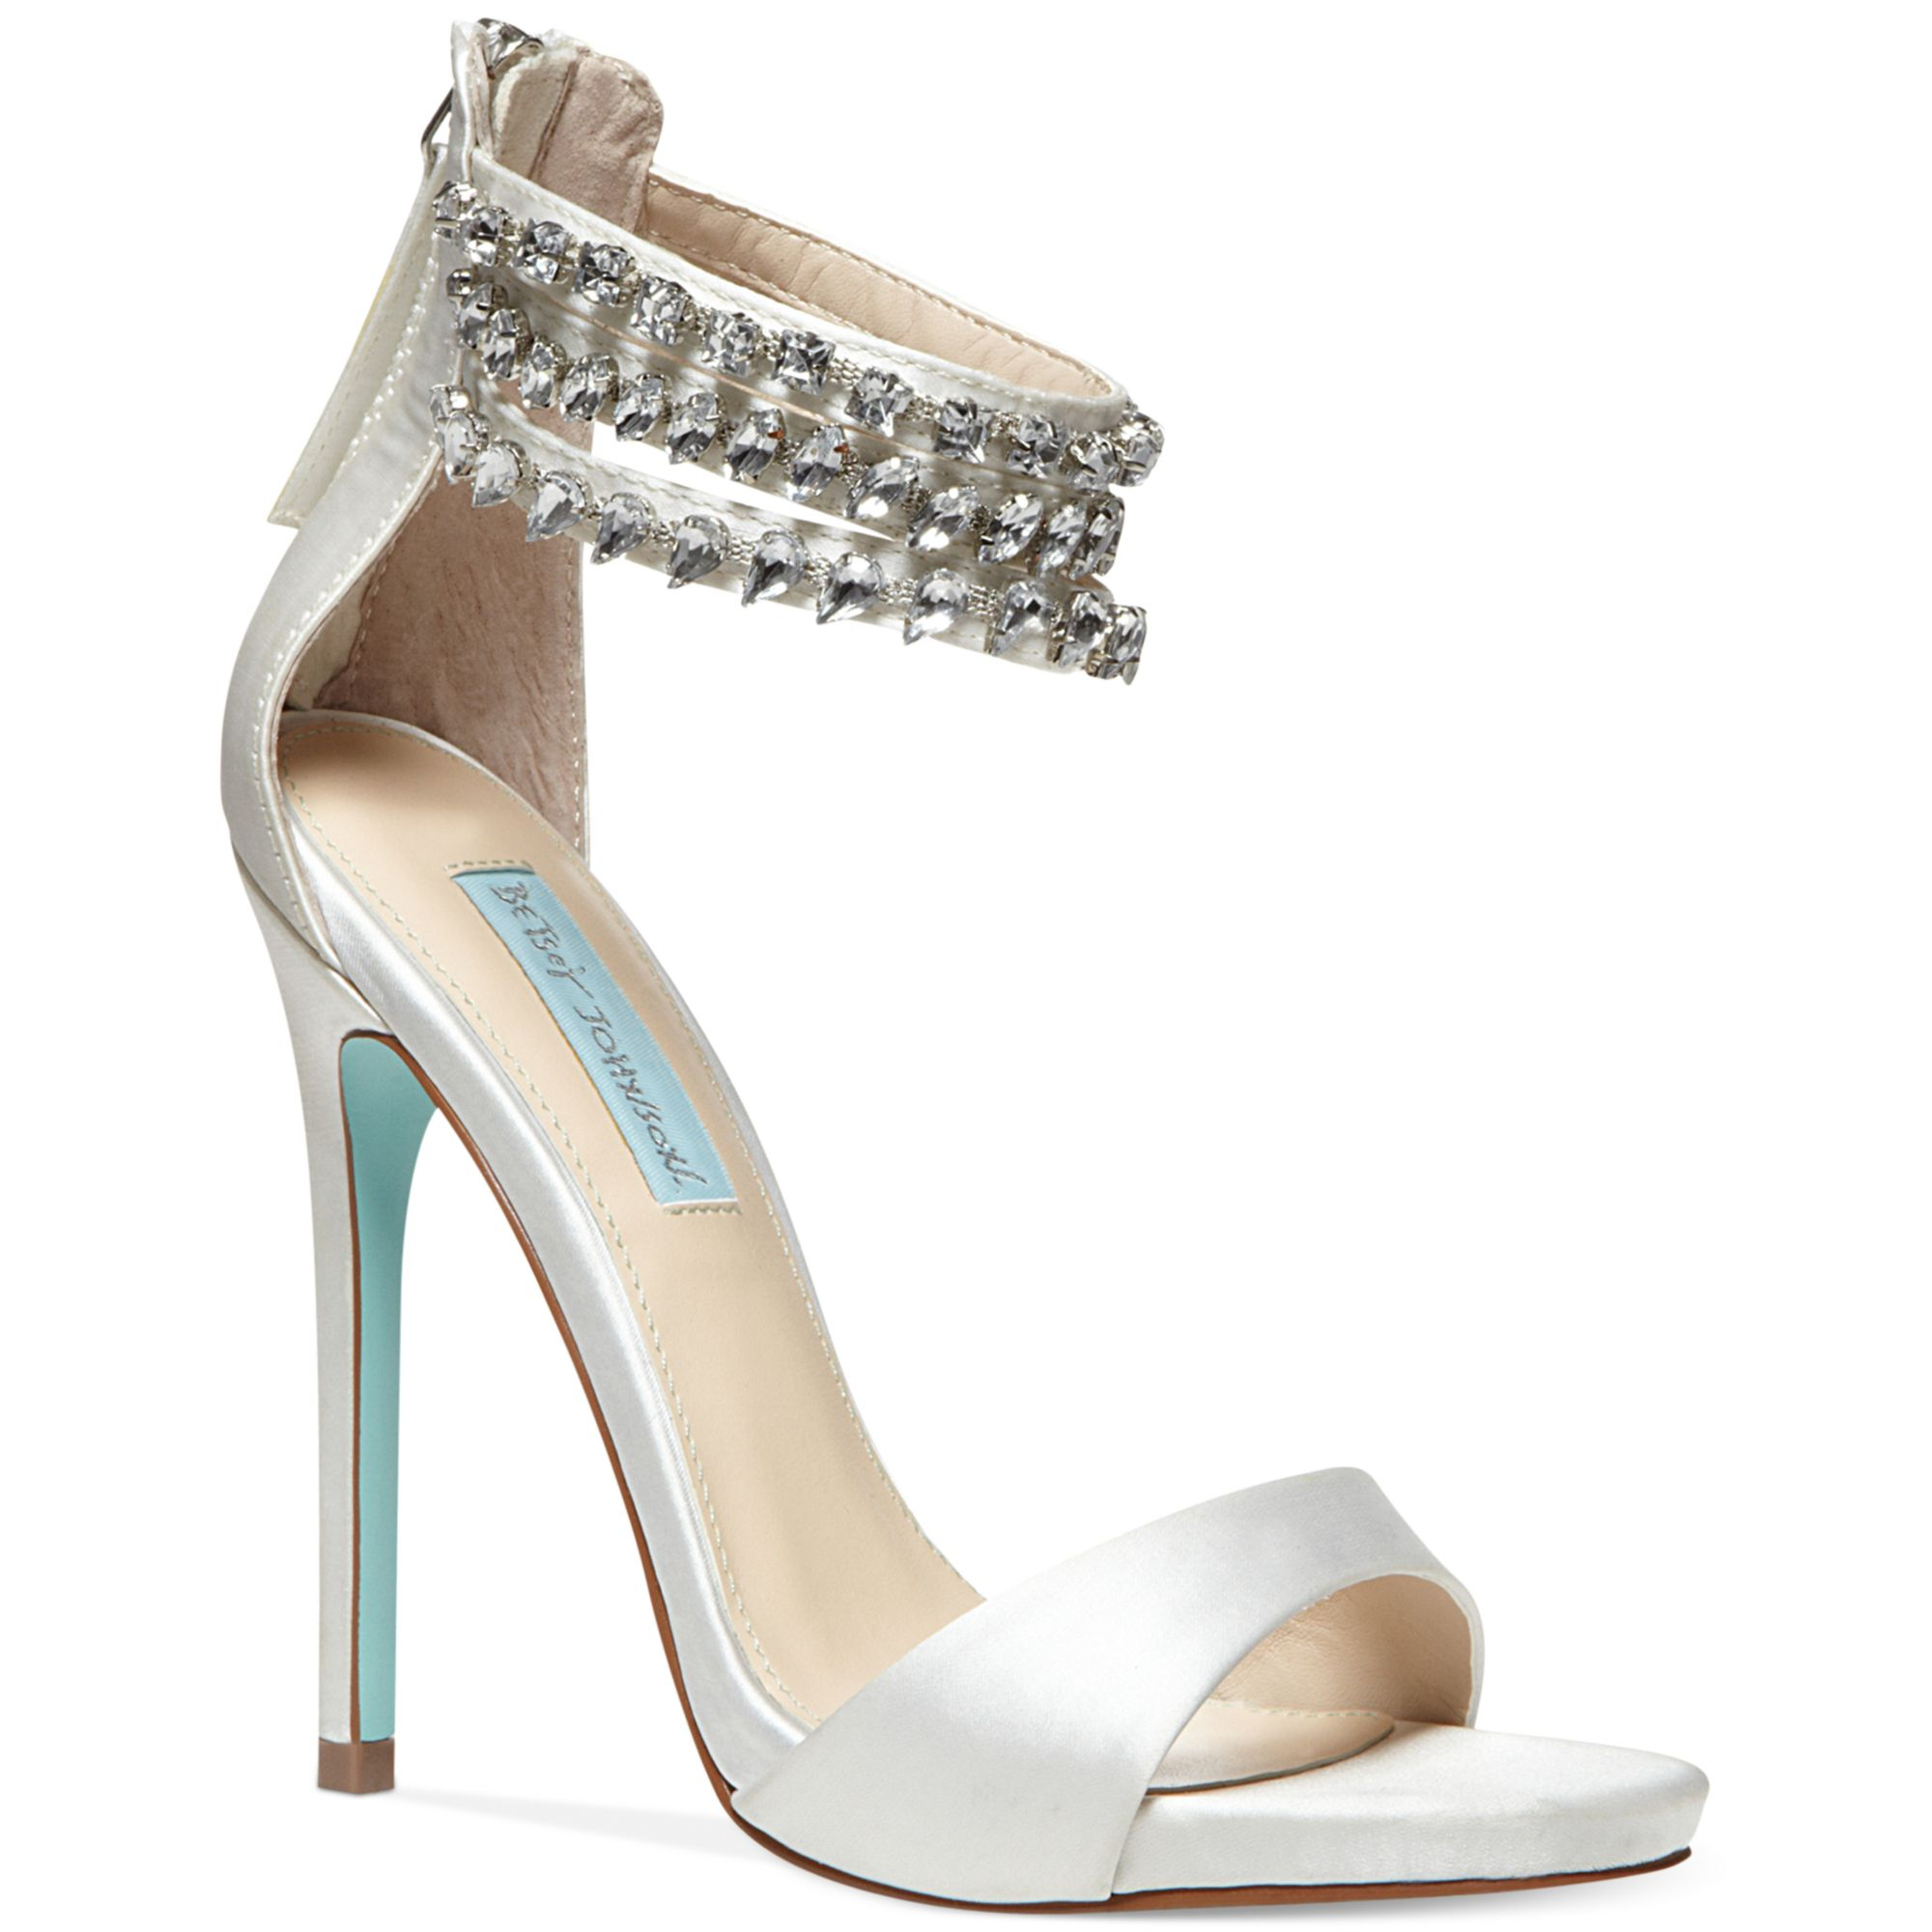 Lyst - Betsey Johnson Blue By Marry Evening Sandals in White